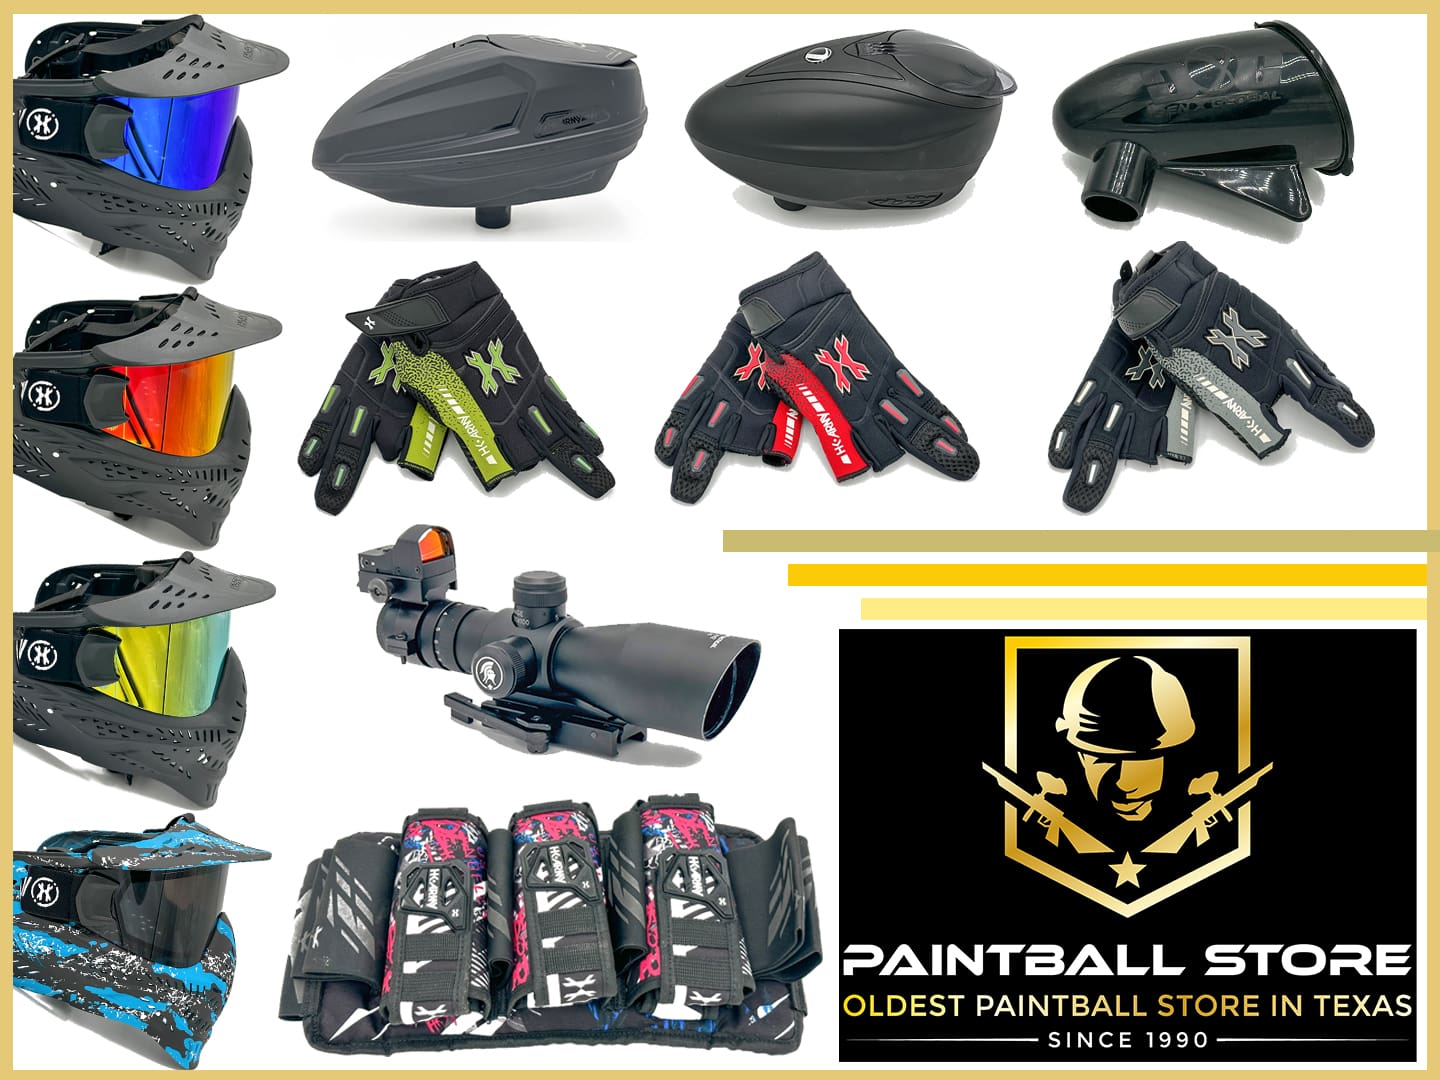 A bunch of different paintball gear and accessories